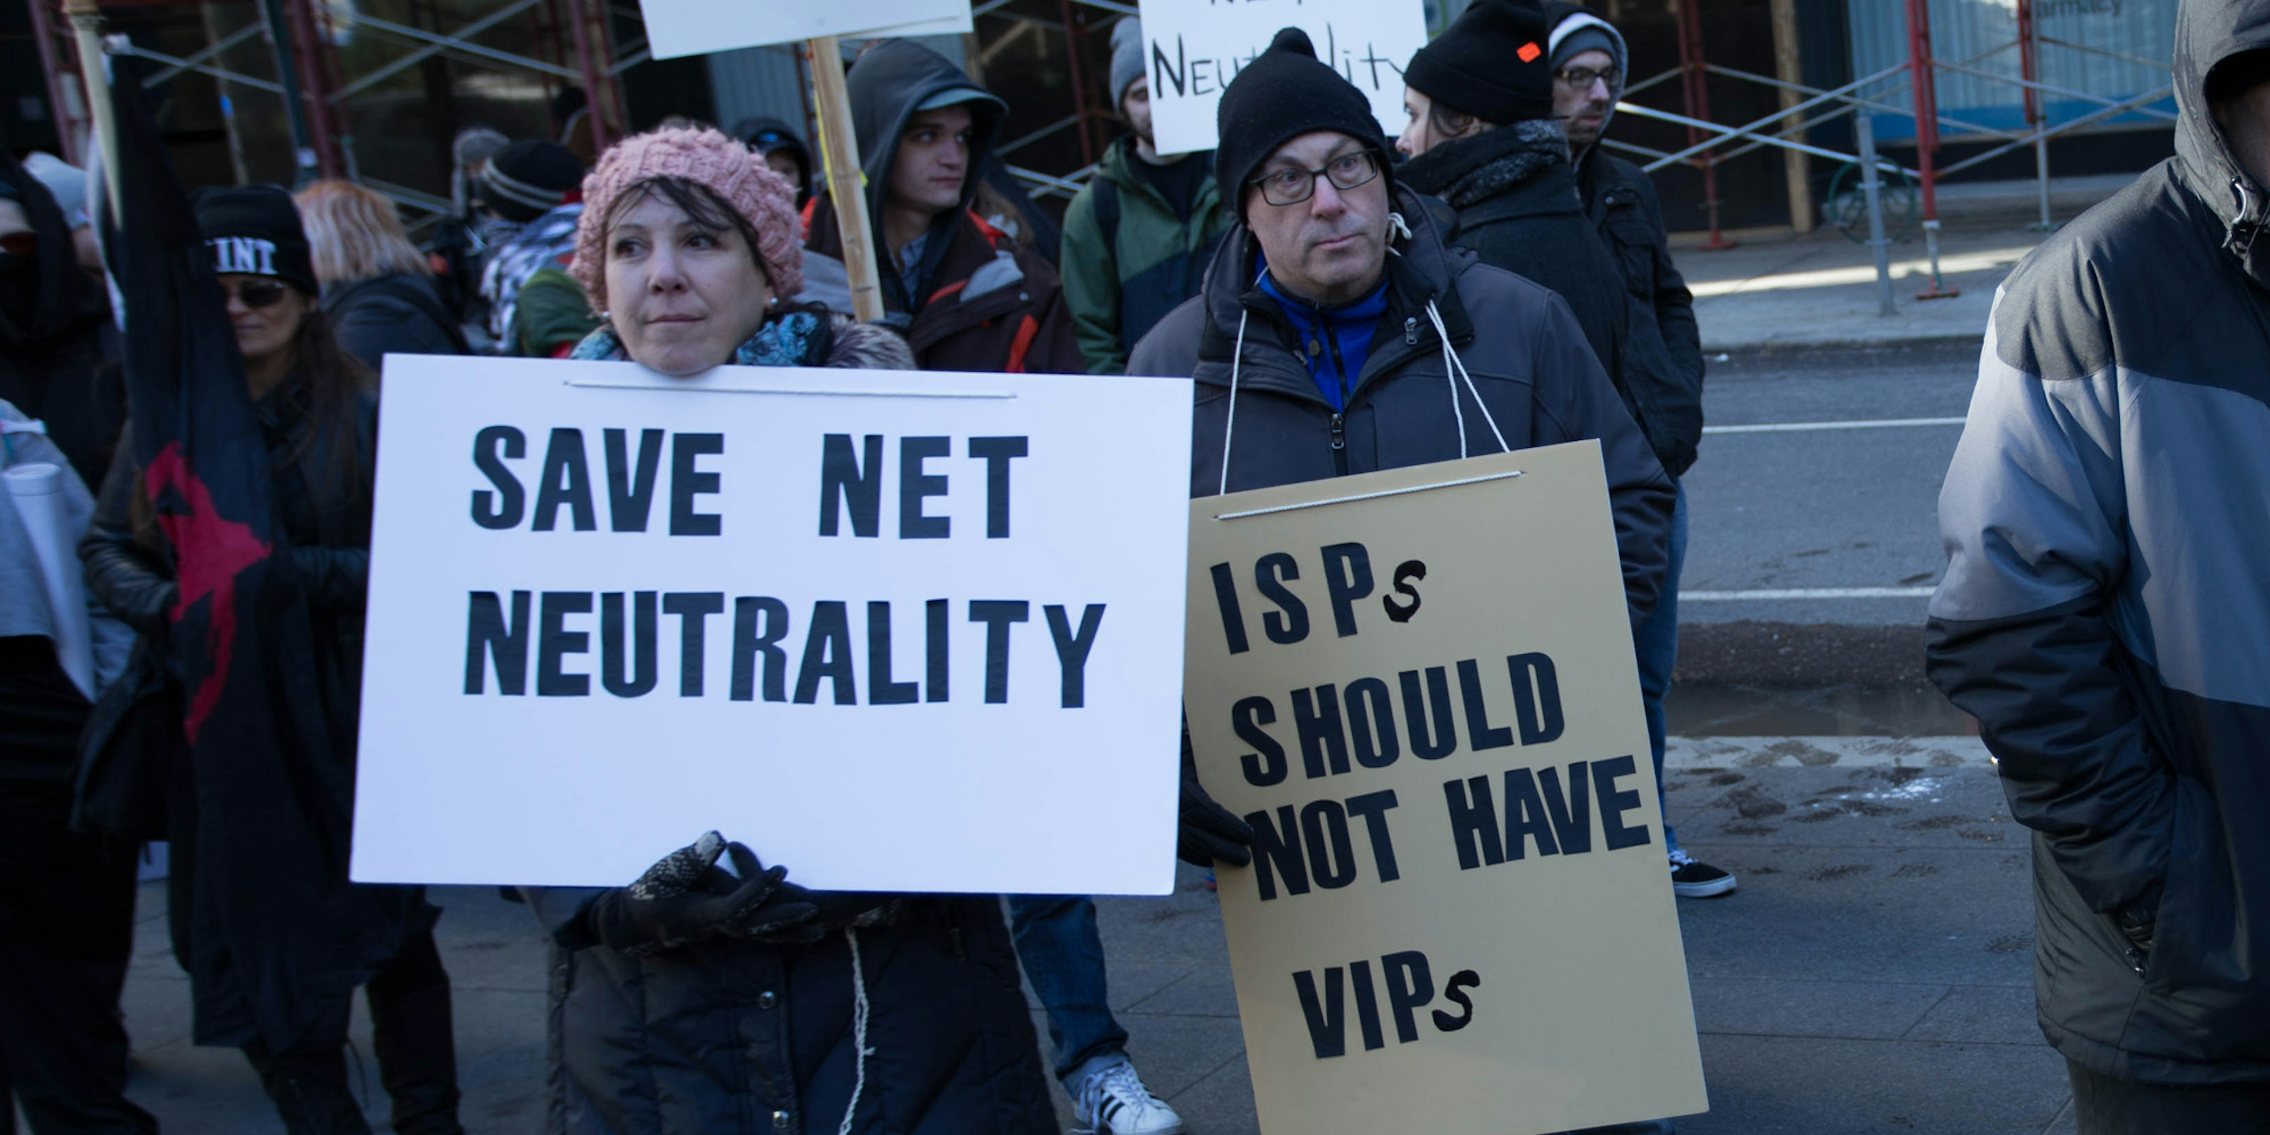 Net neutrality supporters protesting.